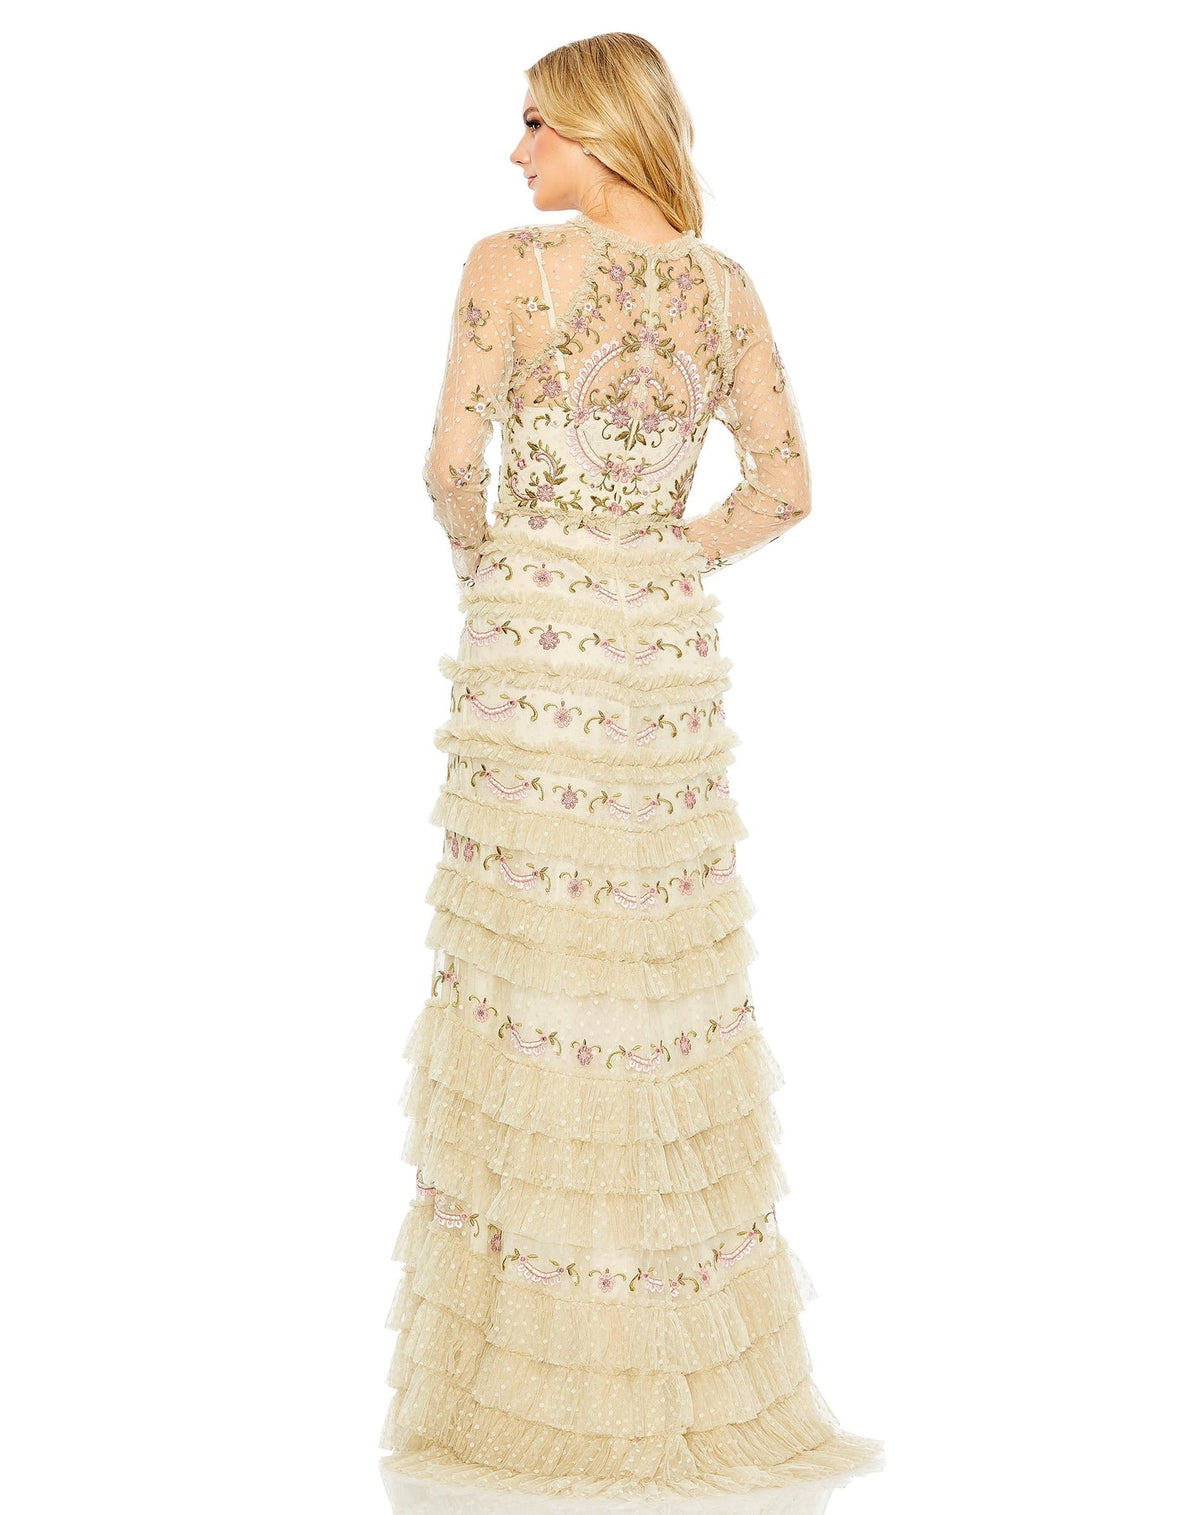 mac duggal, MESH POLKA DOT LONG SLEEVE FLORAL RUFFLE TIRED GOWN, Style #8030, ivory back view